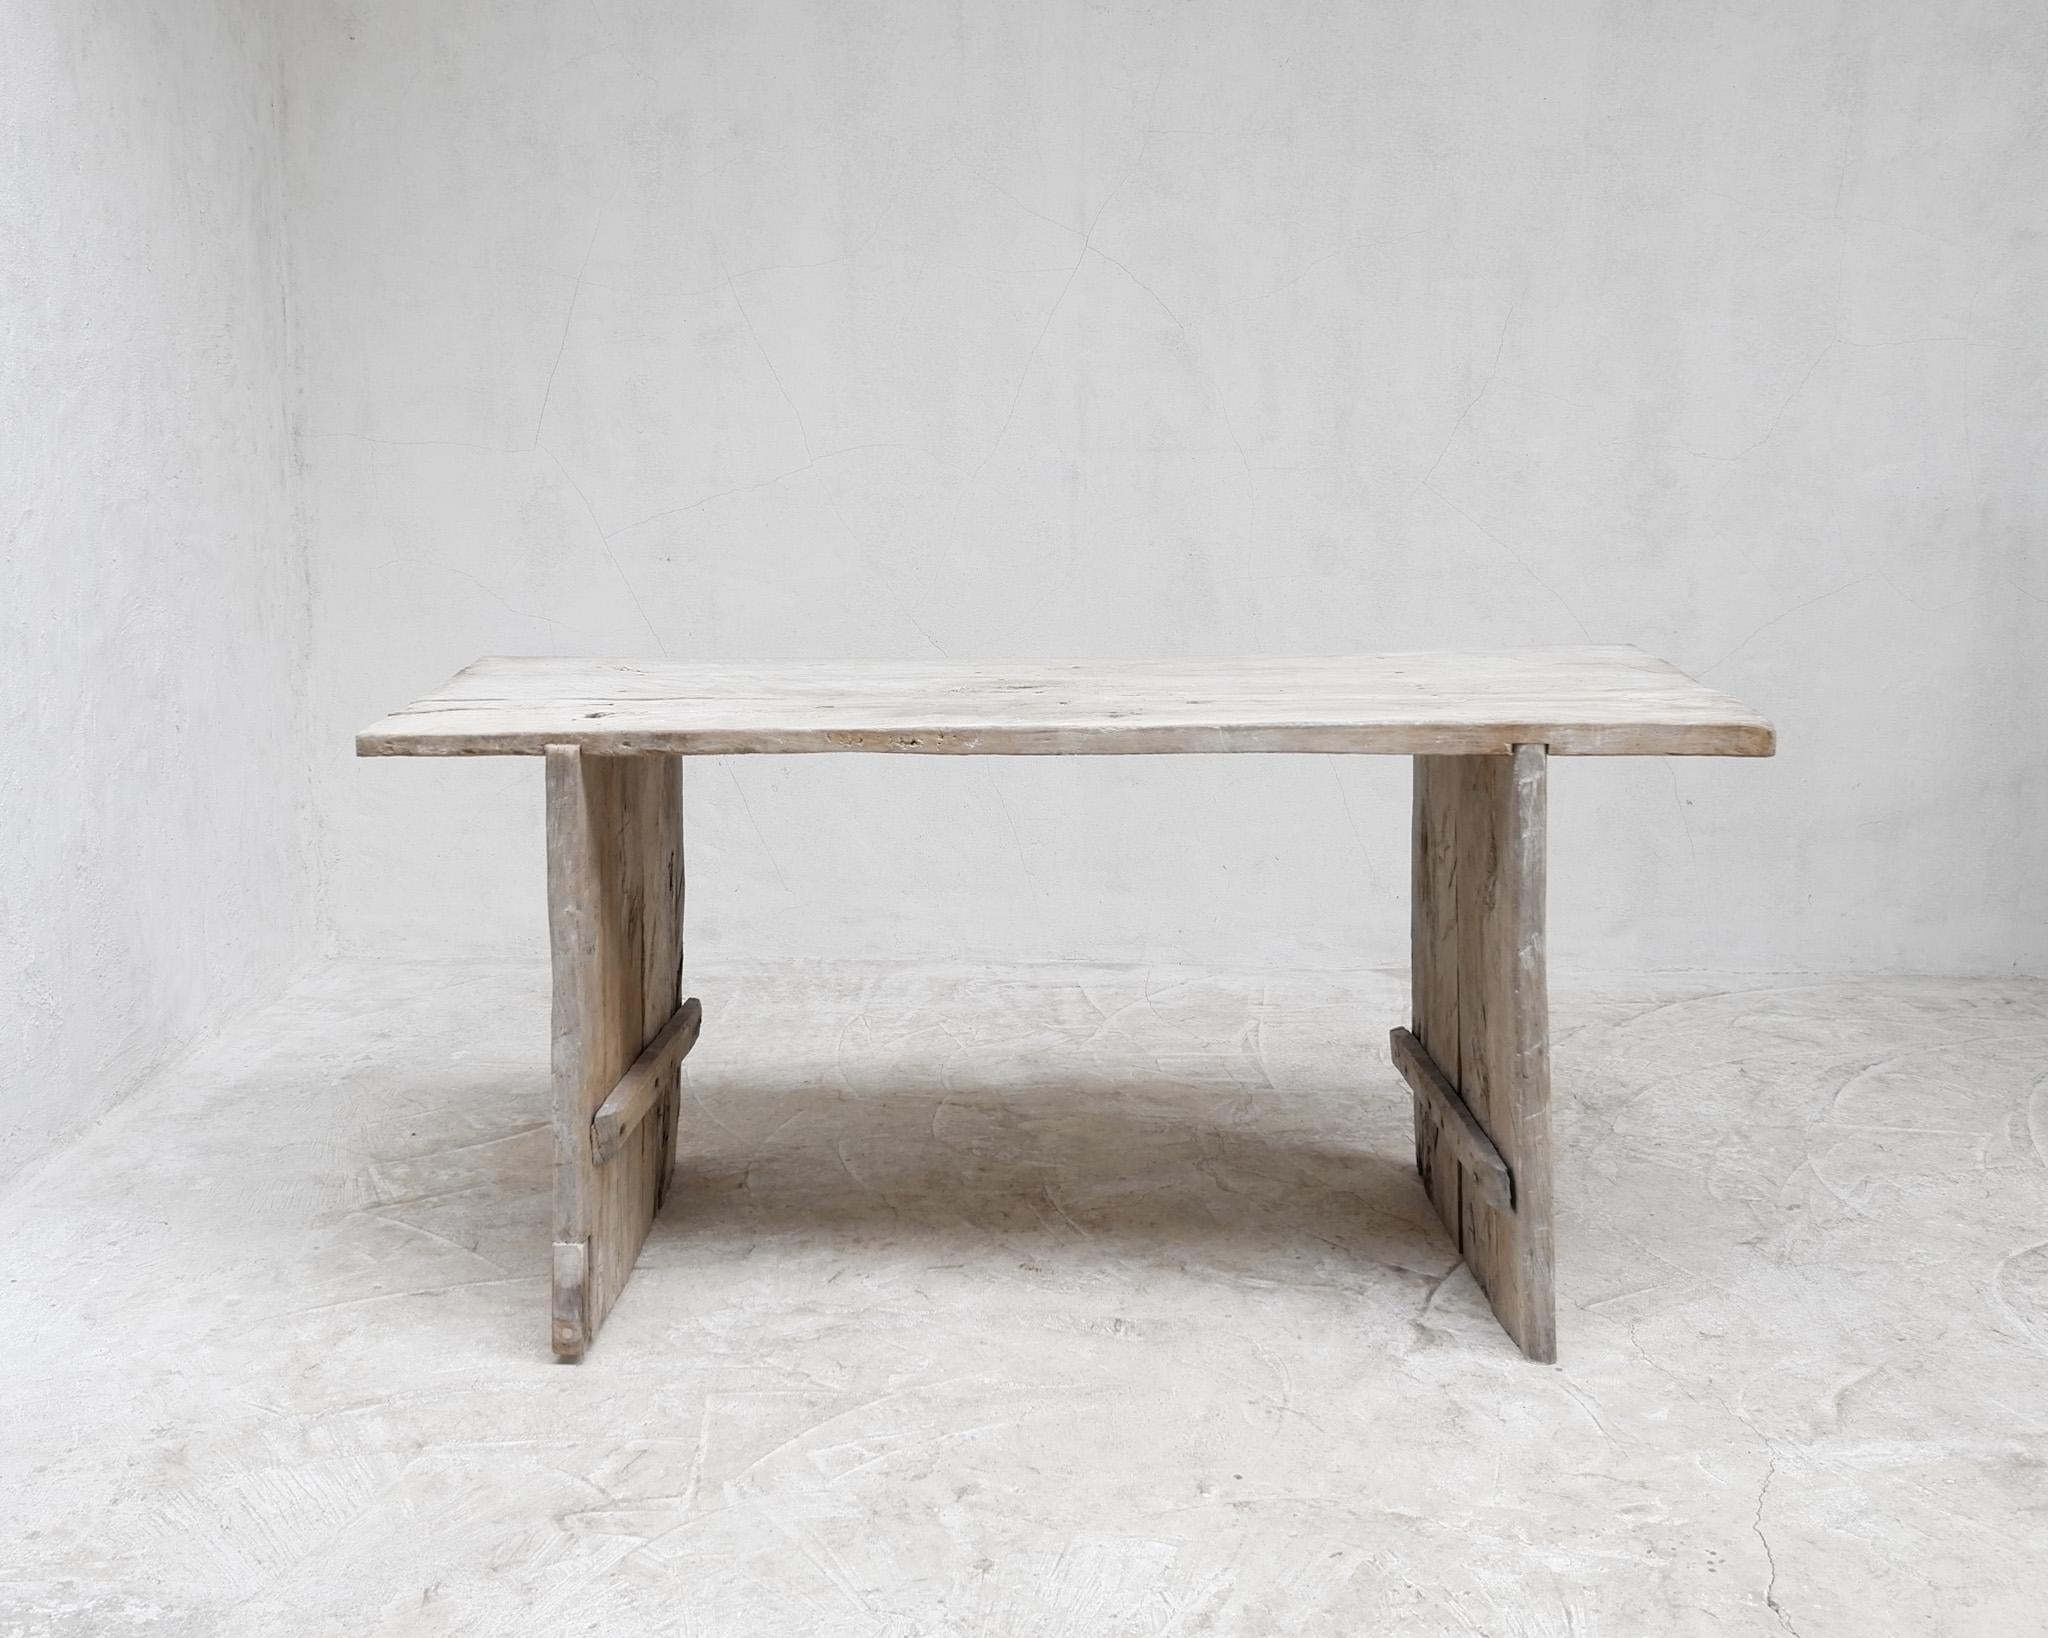 A bespoke bleached-out slab table built by us in our London workshop.

The table was assembled using rare 18th/19th C. Continental beech boards.

Only by using 18th/19th C. material we can showcase the unique surface and texture revealed by